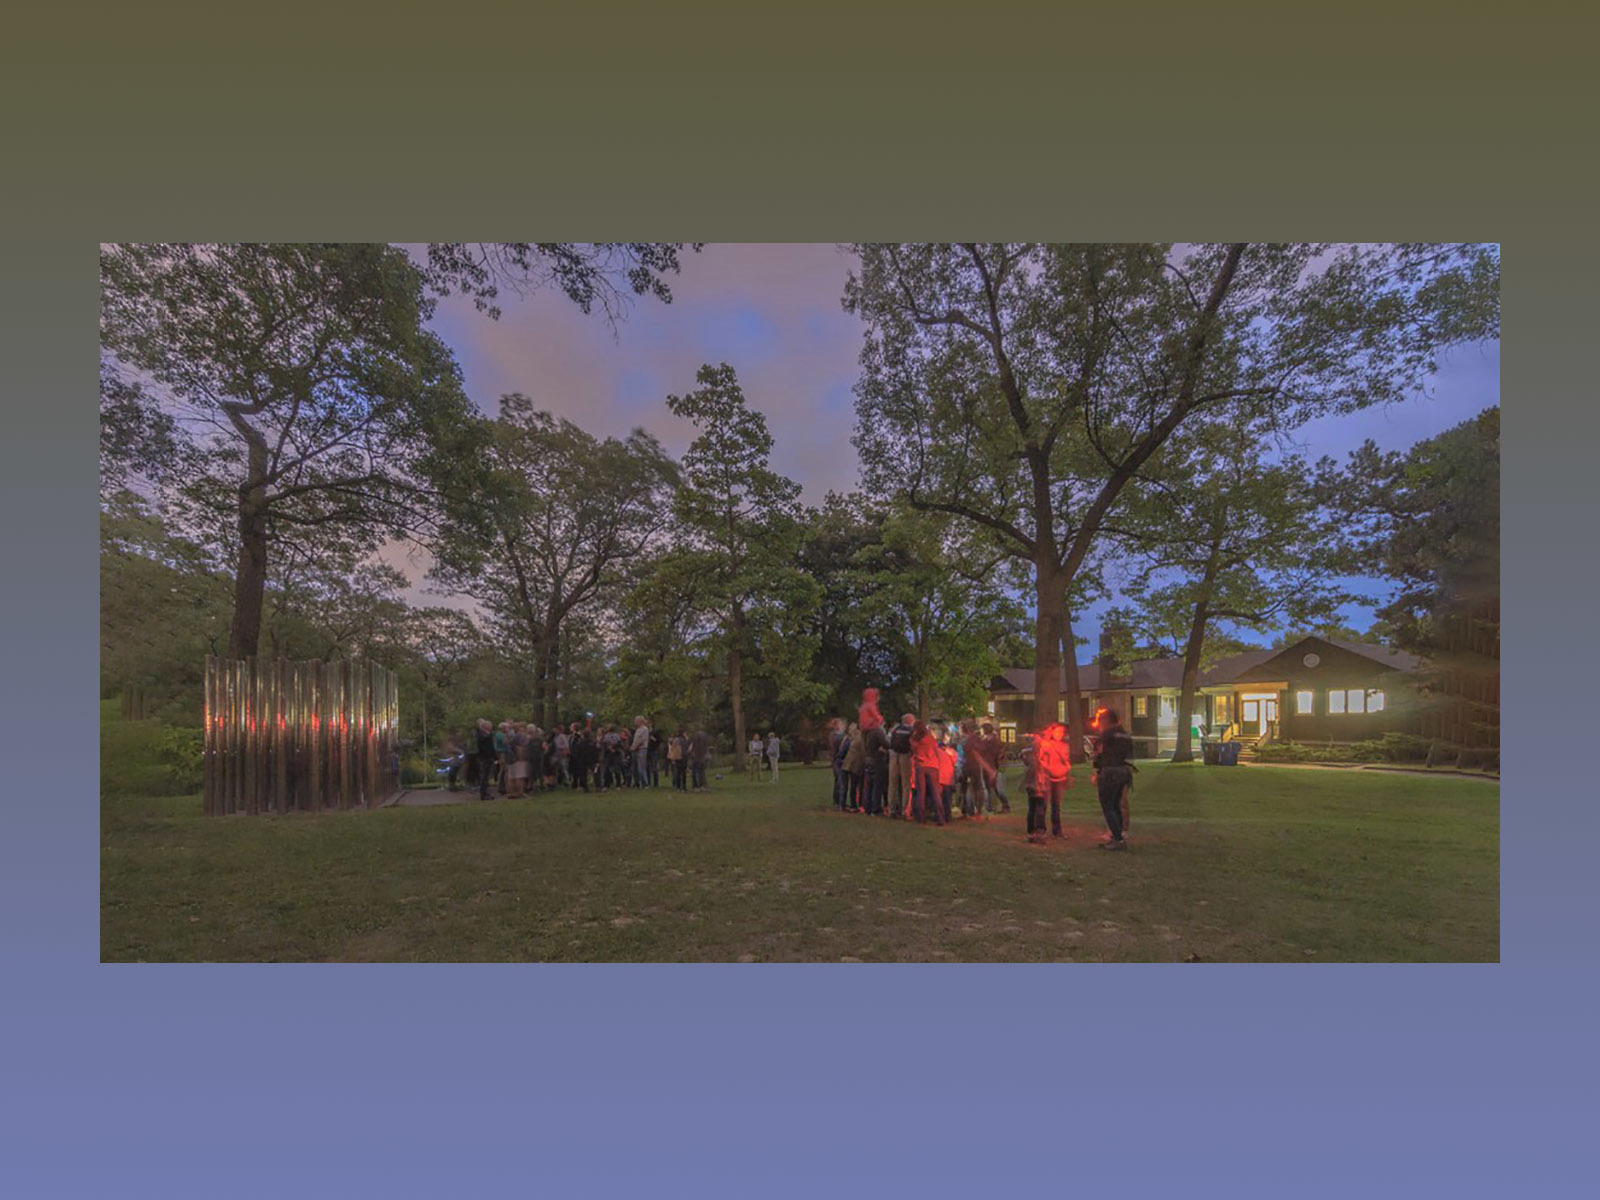 groups of people standing on a lawn at dusk